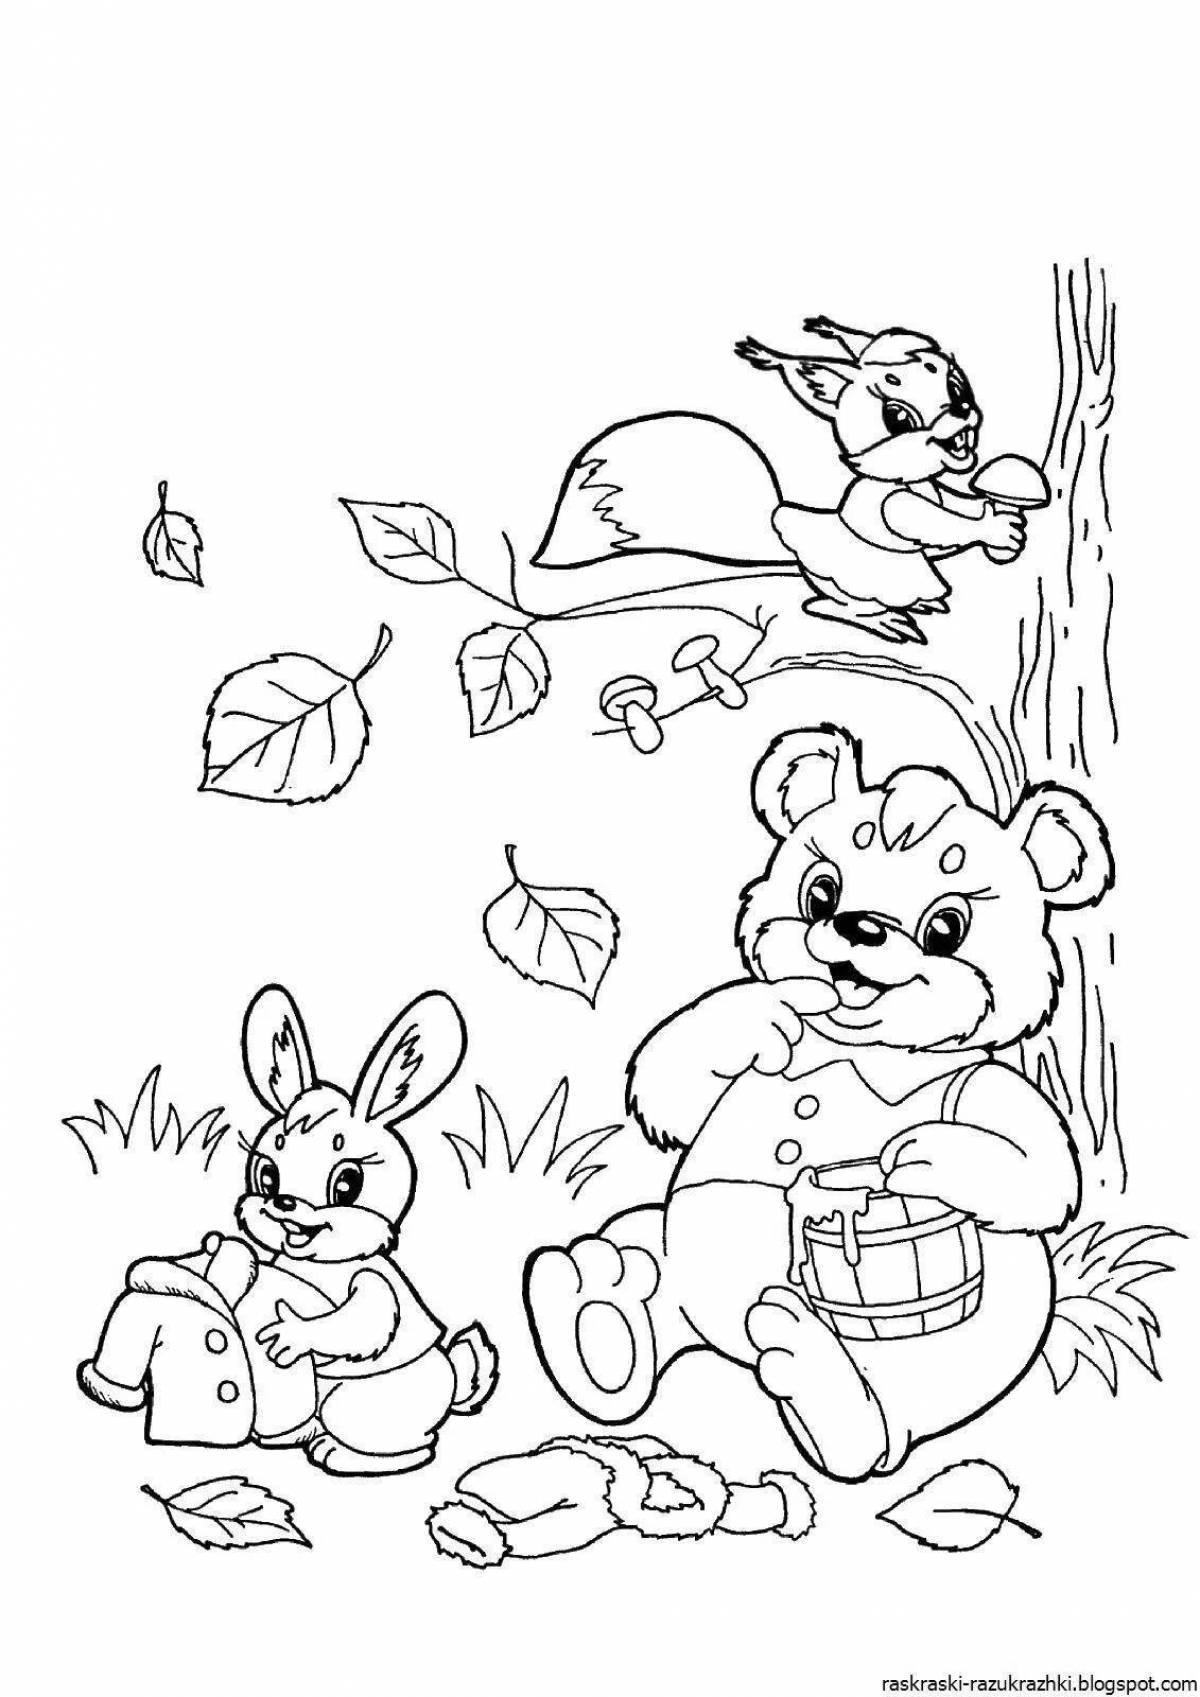 Fun coloring book for older children